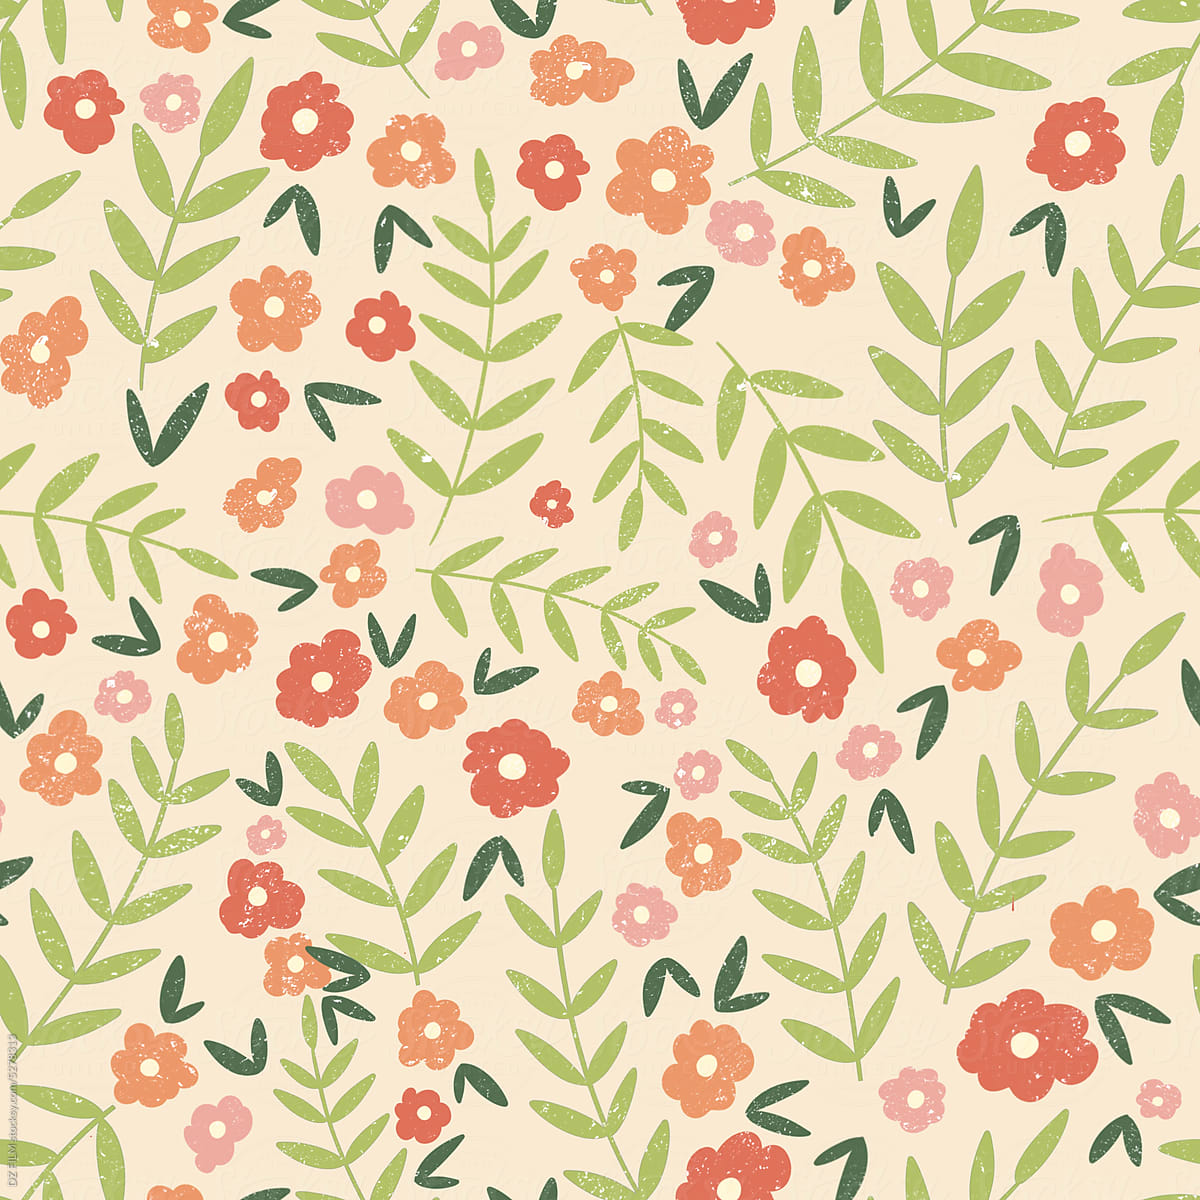 Illustration of twigs and flowers on a solid background